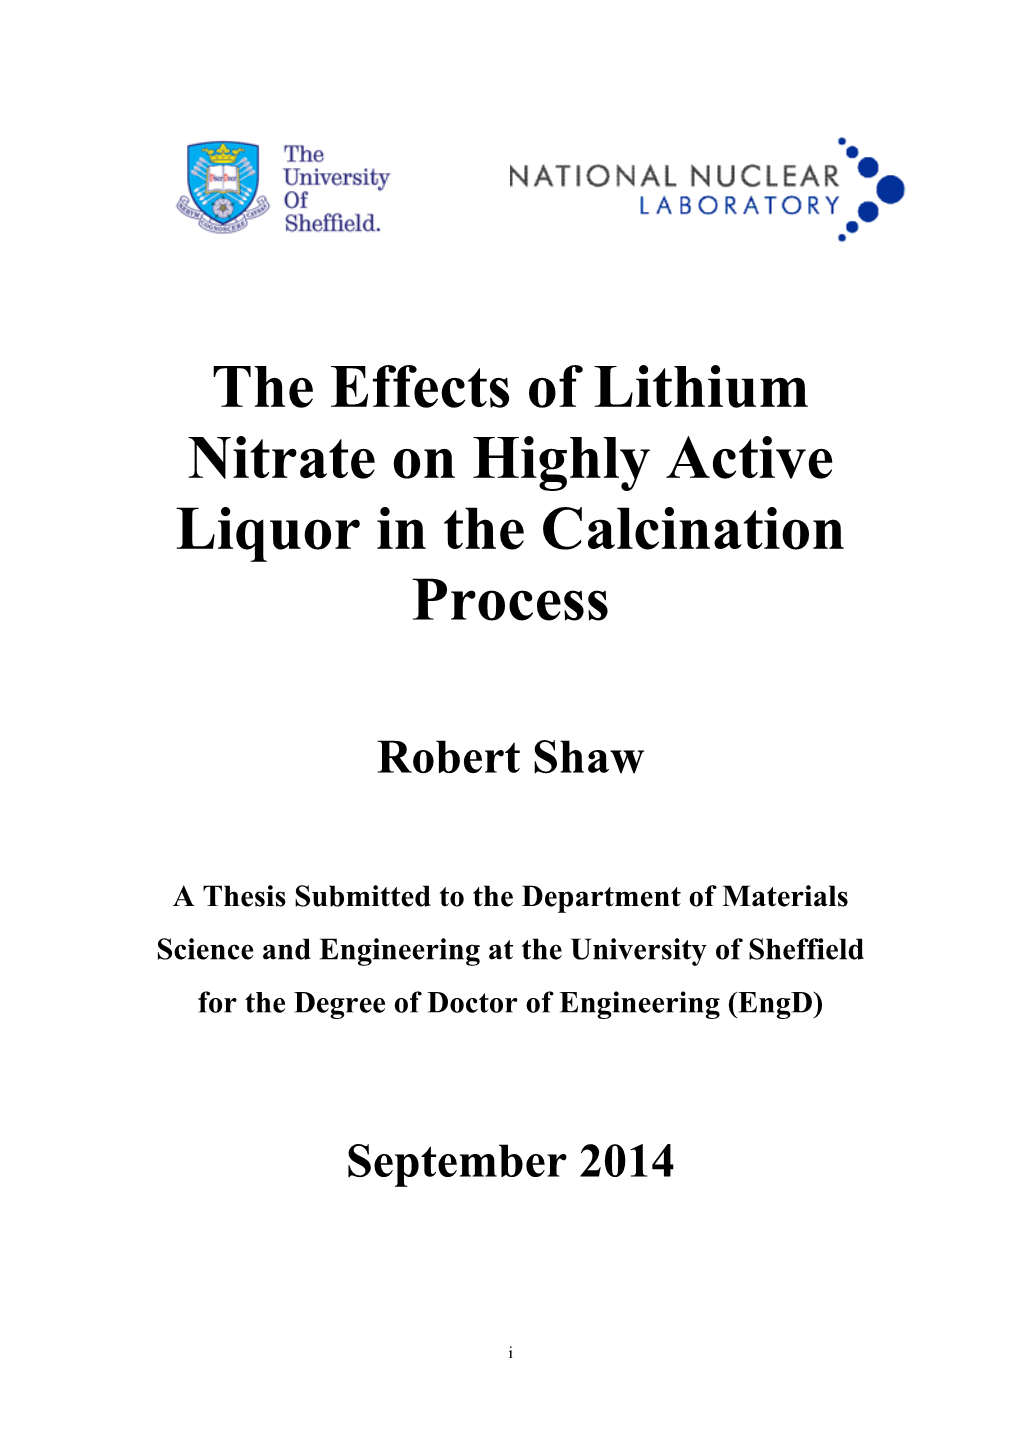 The Effects of Lithium Nitrate on Highly Active Liquor in the Calcination Process